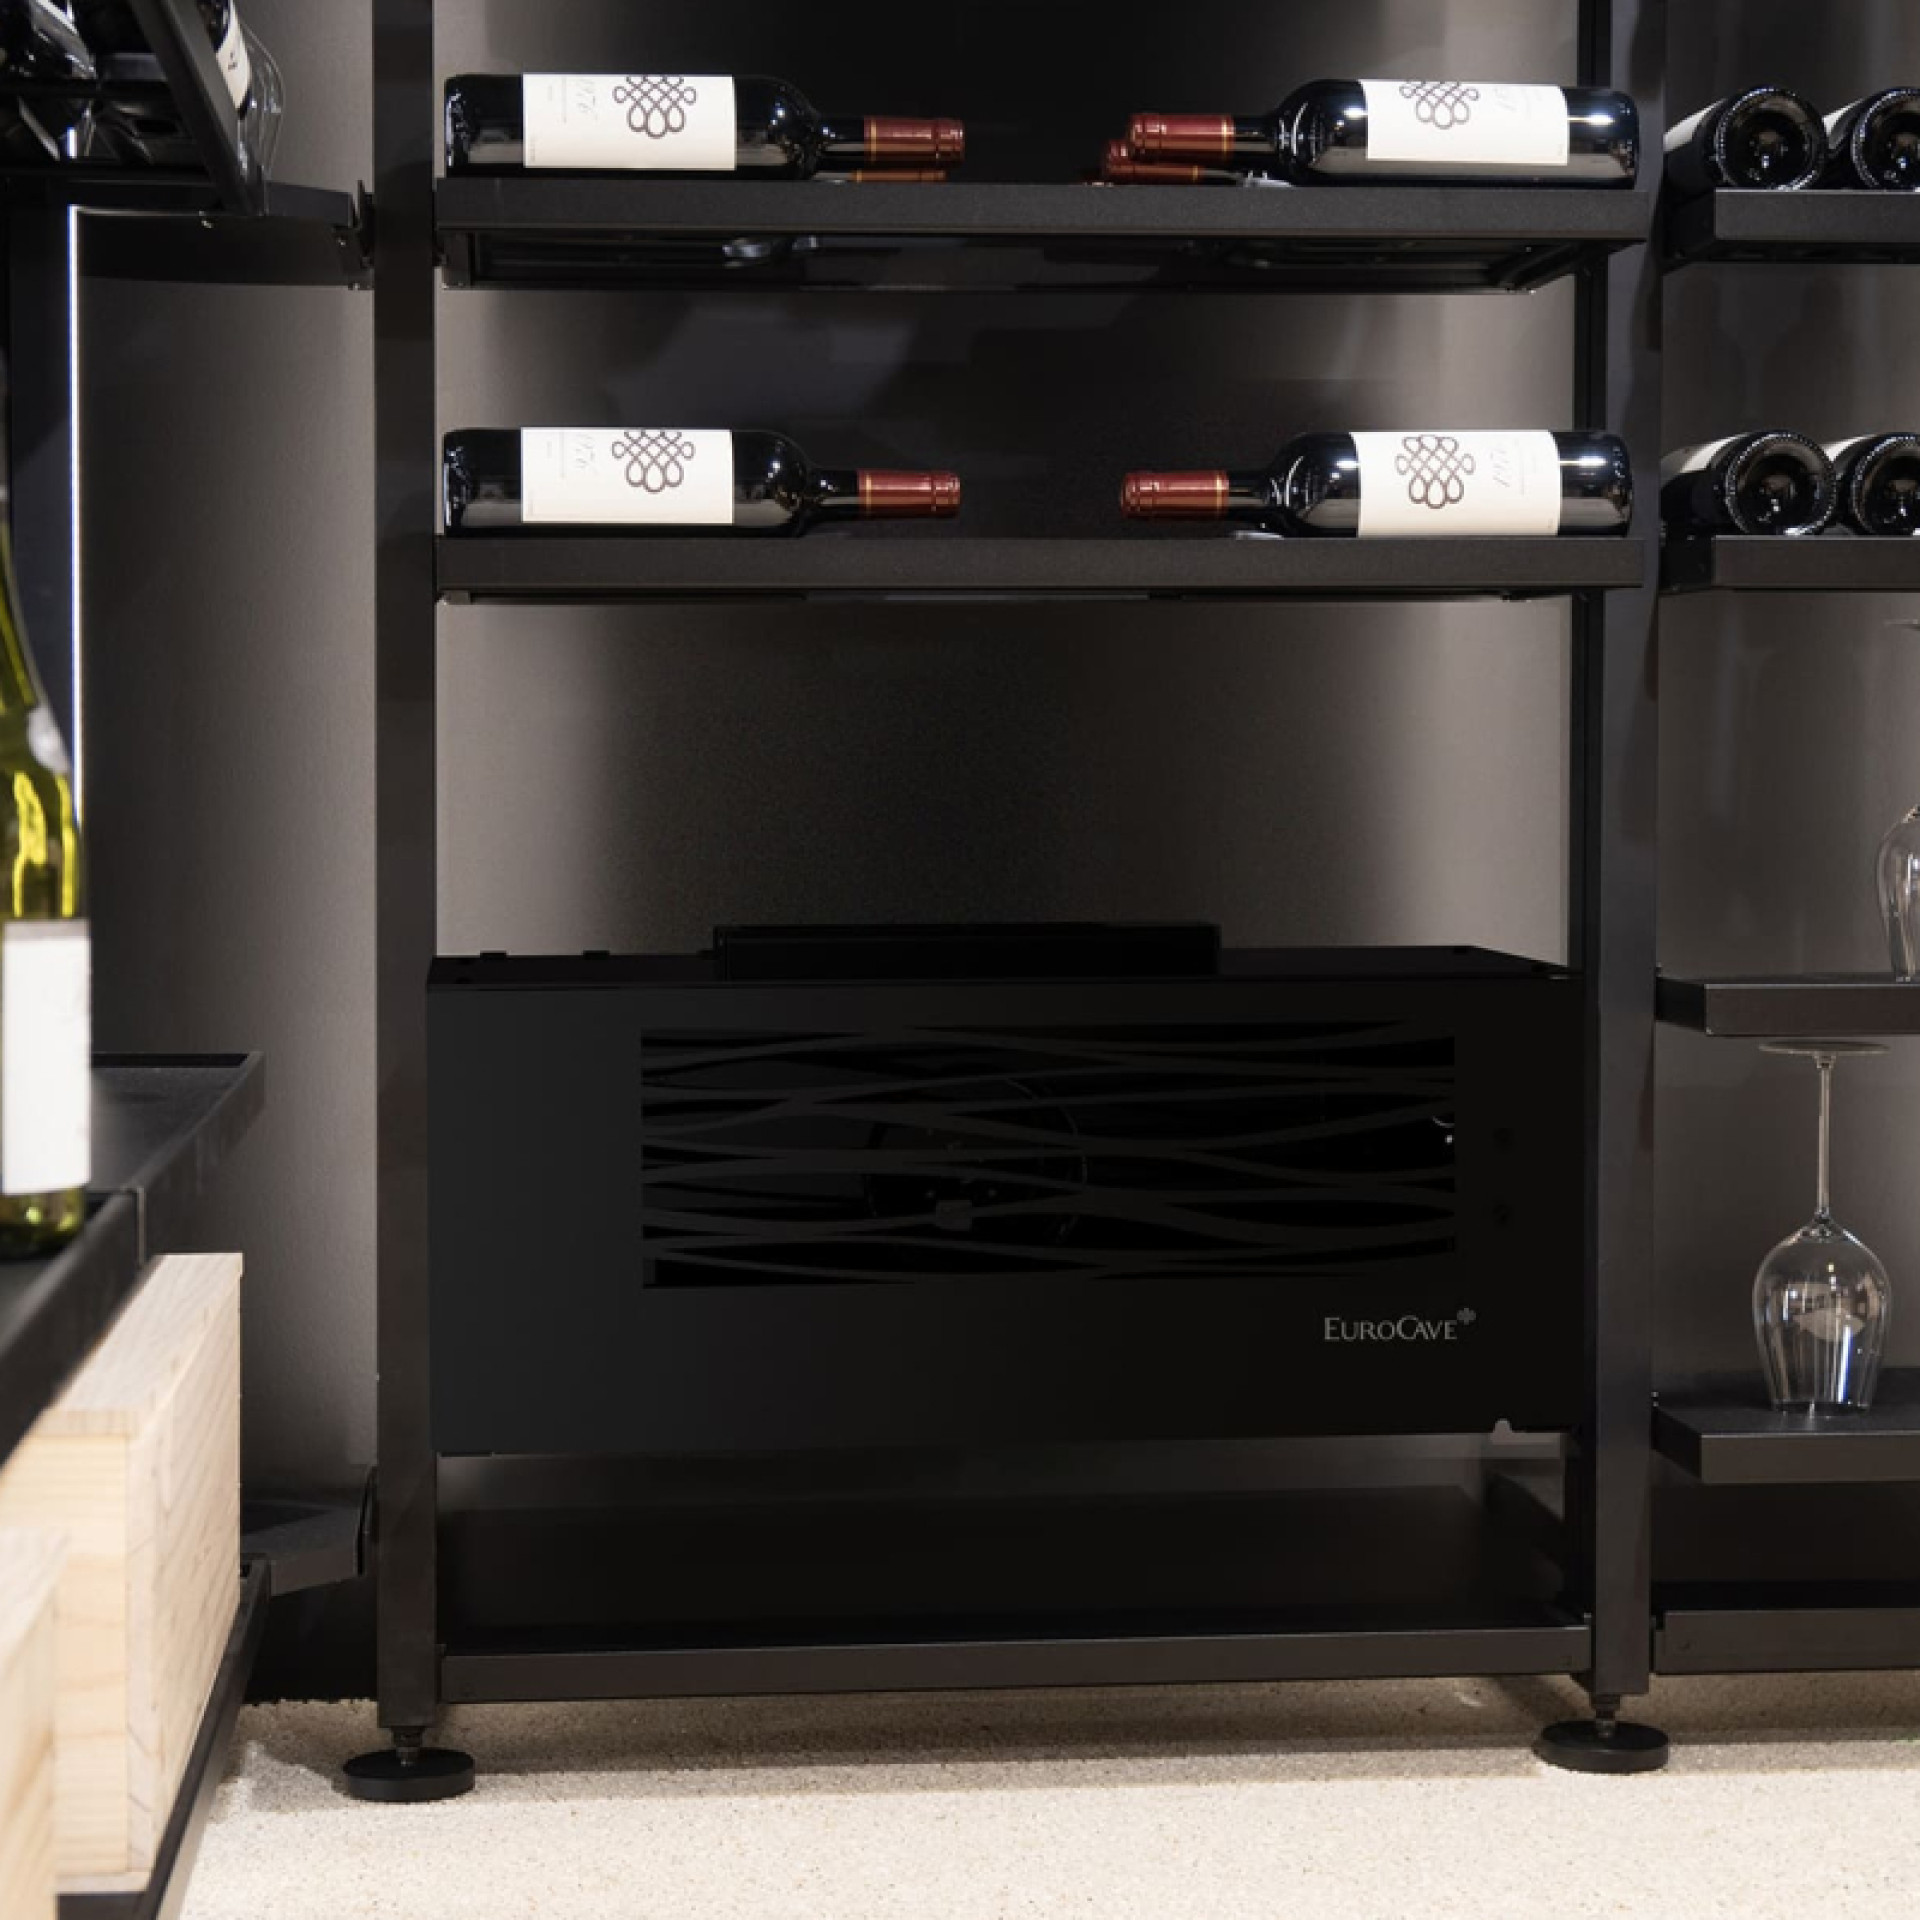 Small wine cellar air conditioner in glossy black design, water split system. Compact for easy installation attached to the wall or placed on the floor.